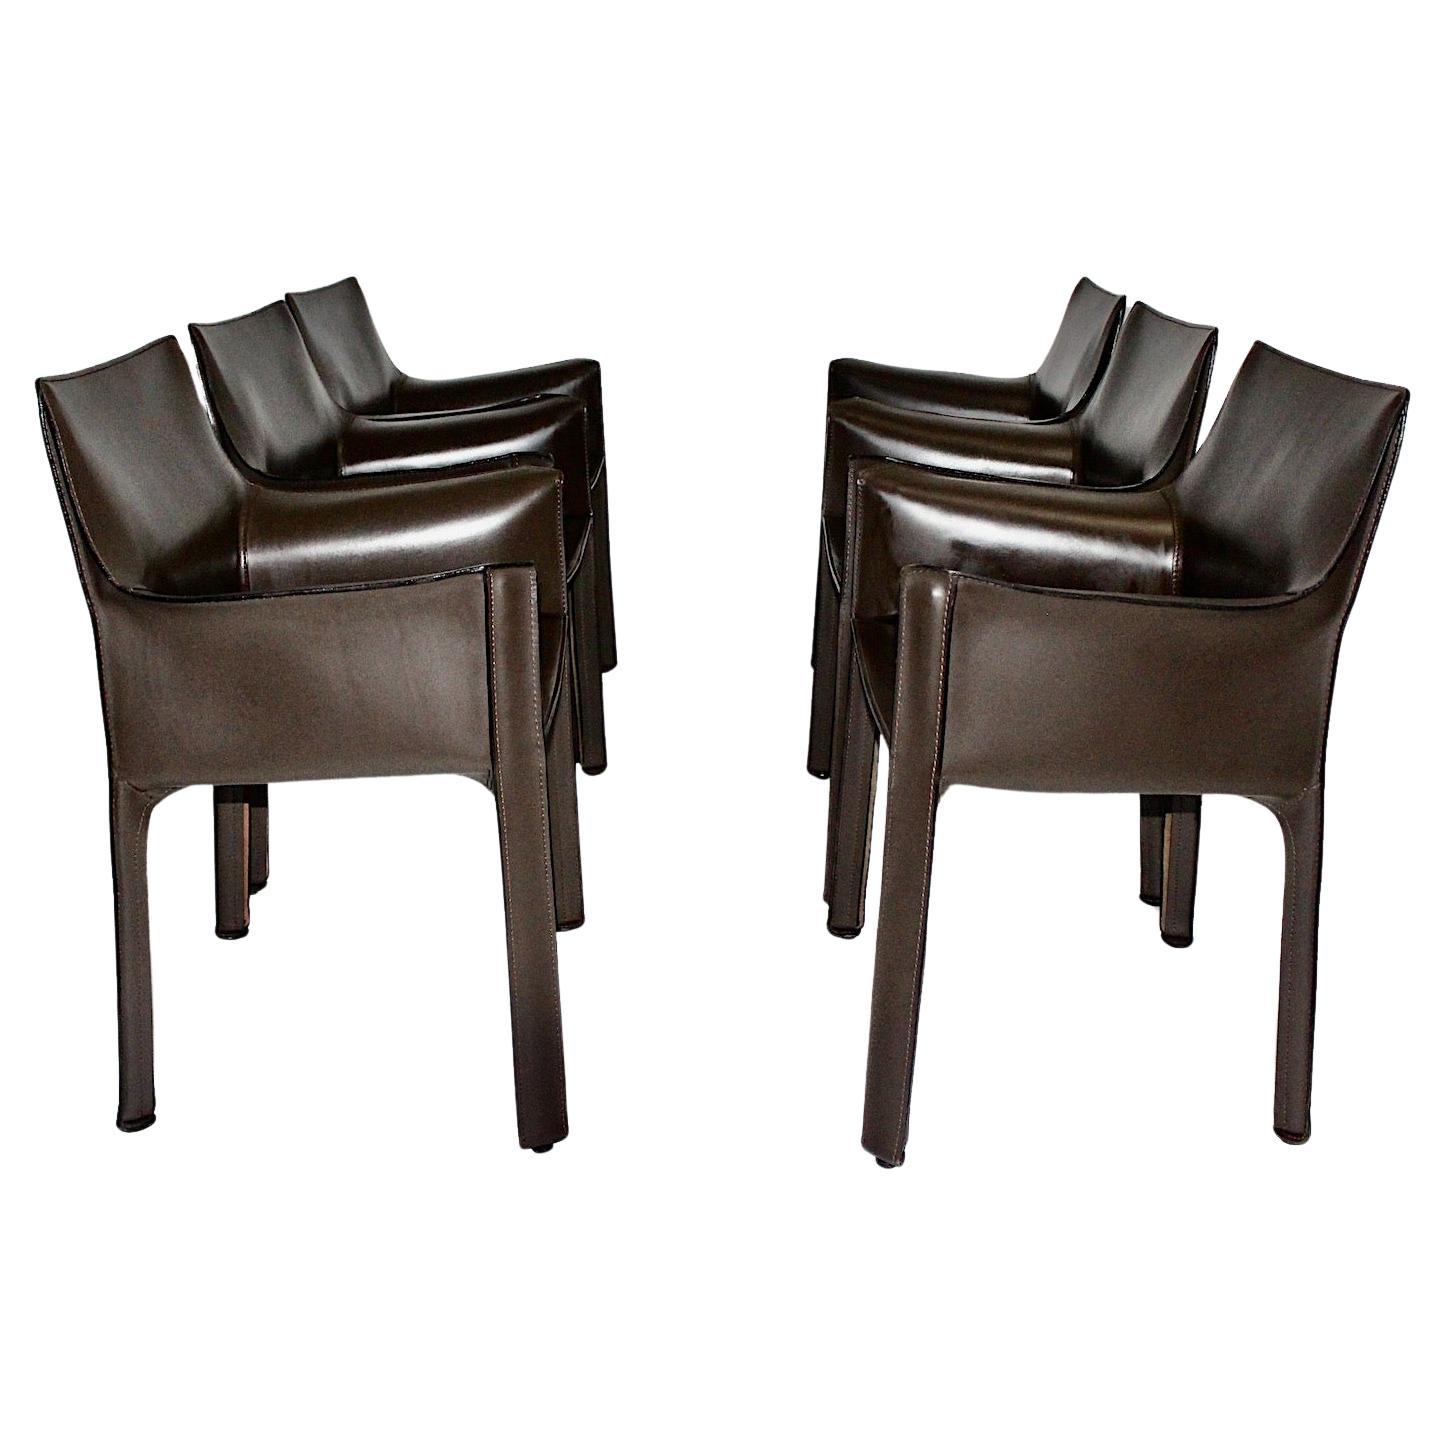 Mario Bellini Vintage Chocolate Brown Leather Dining Chairs Cassina 1970s Italy For Sale